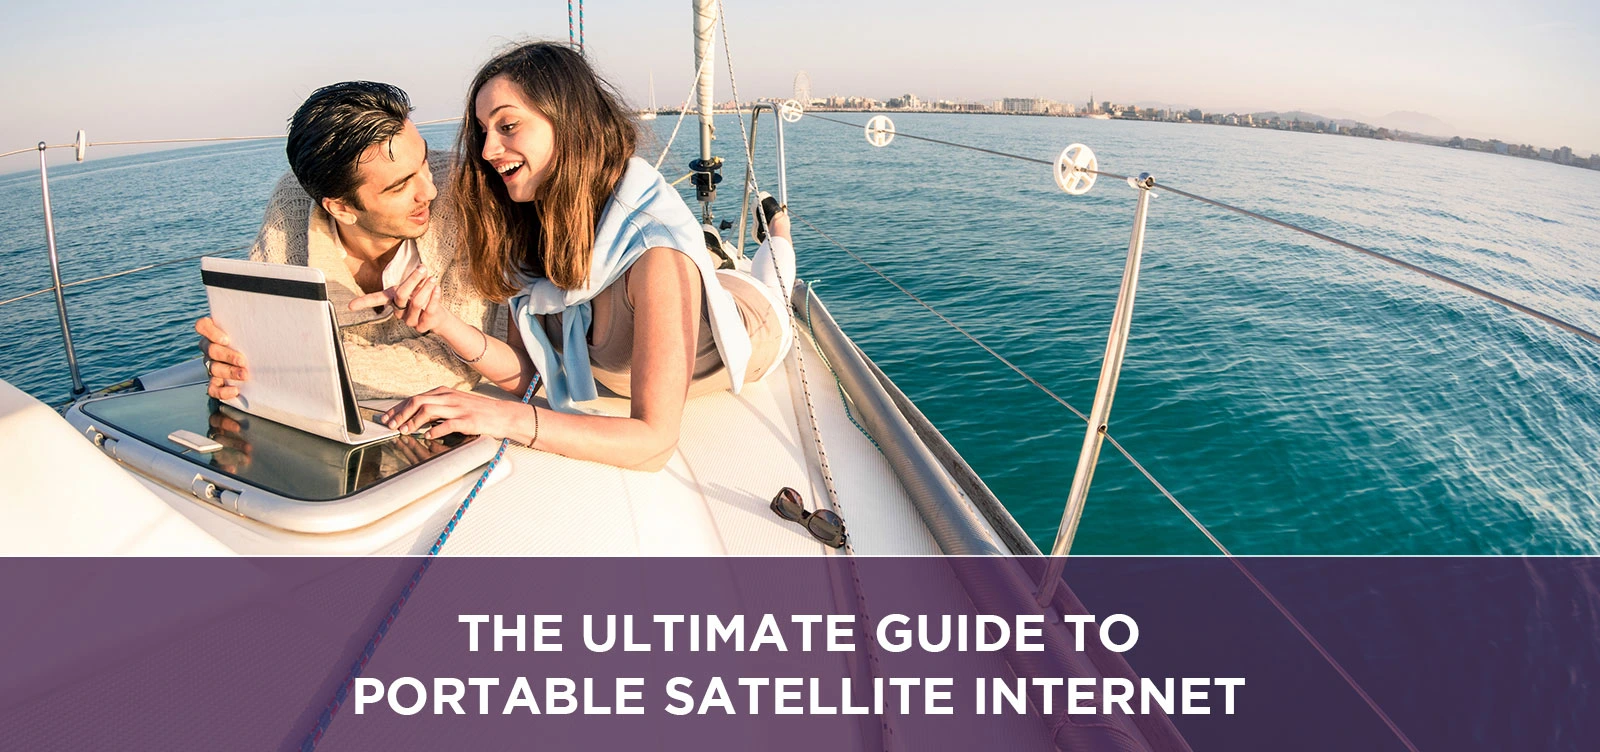 The Ultimate Guide to Portable Satellite Internet